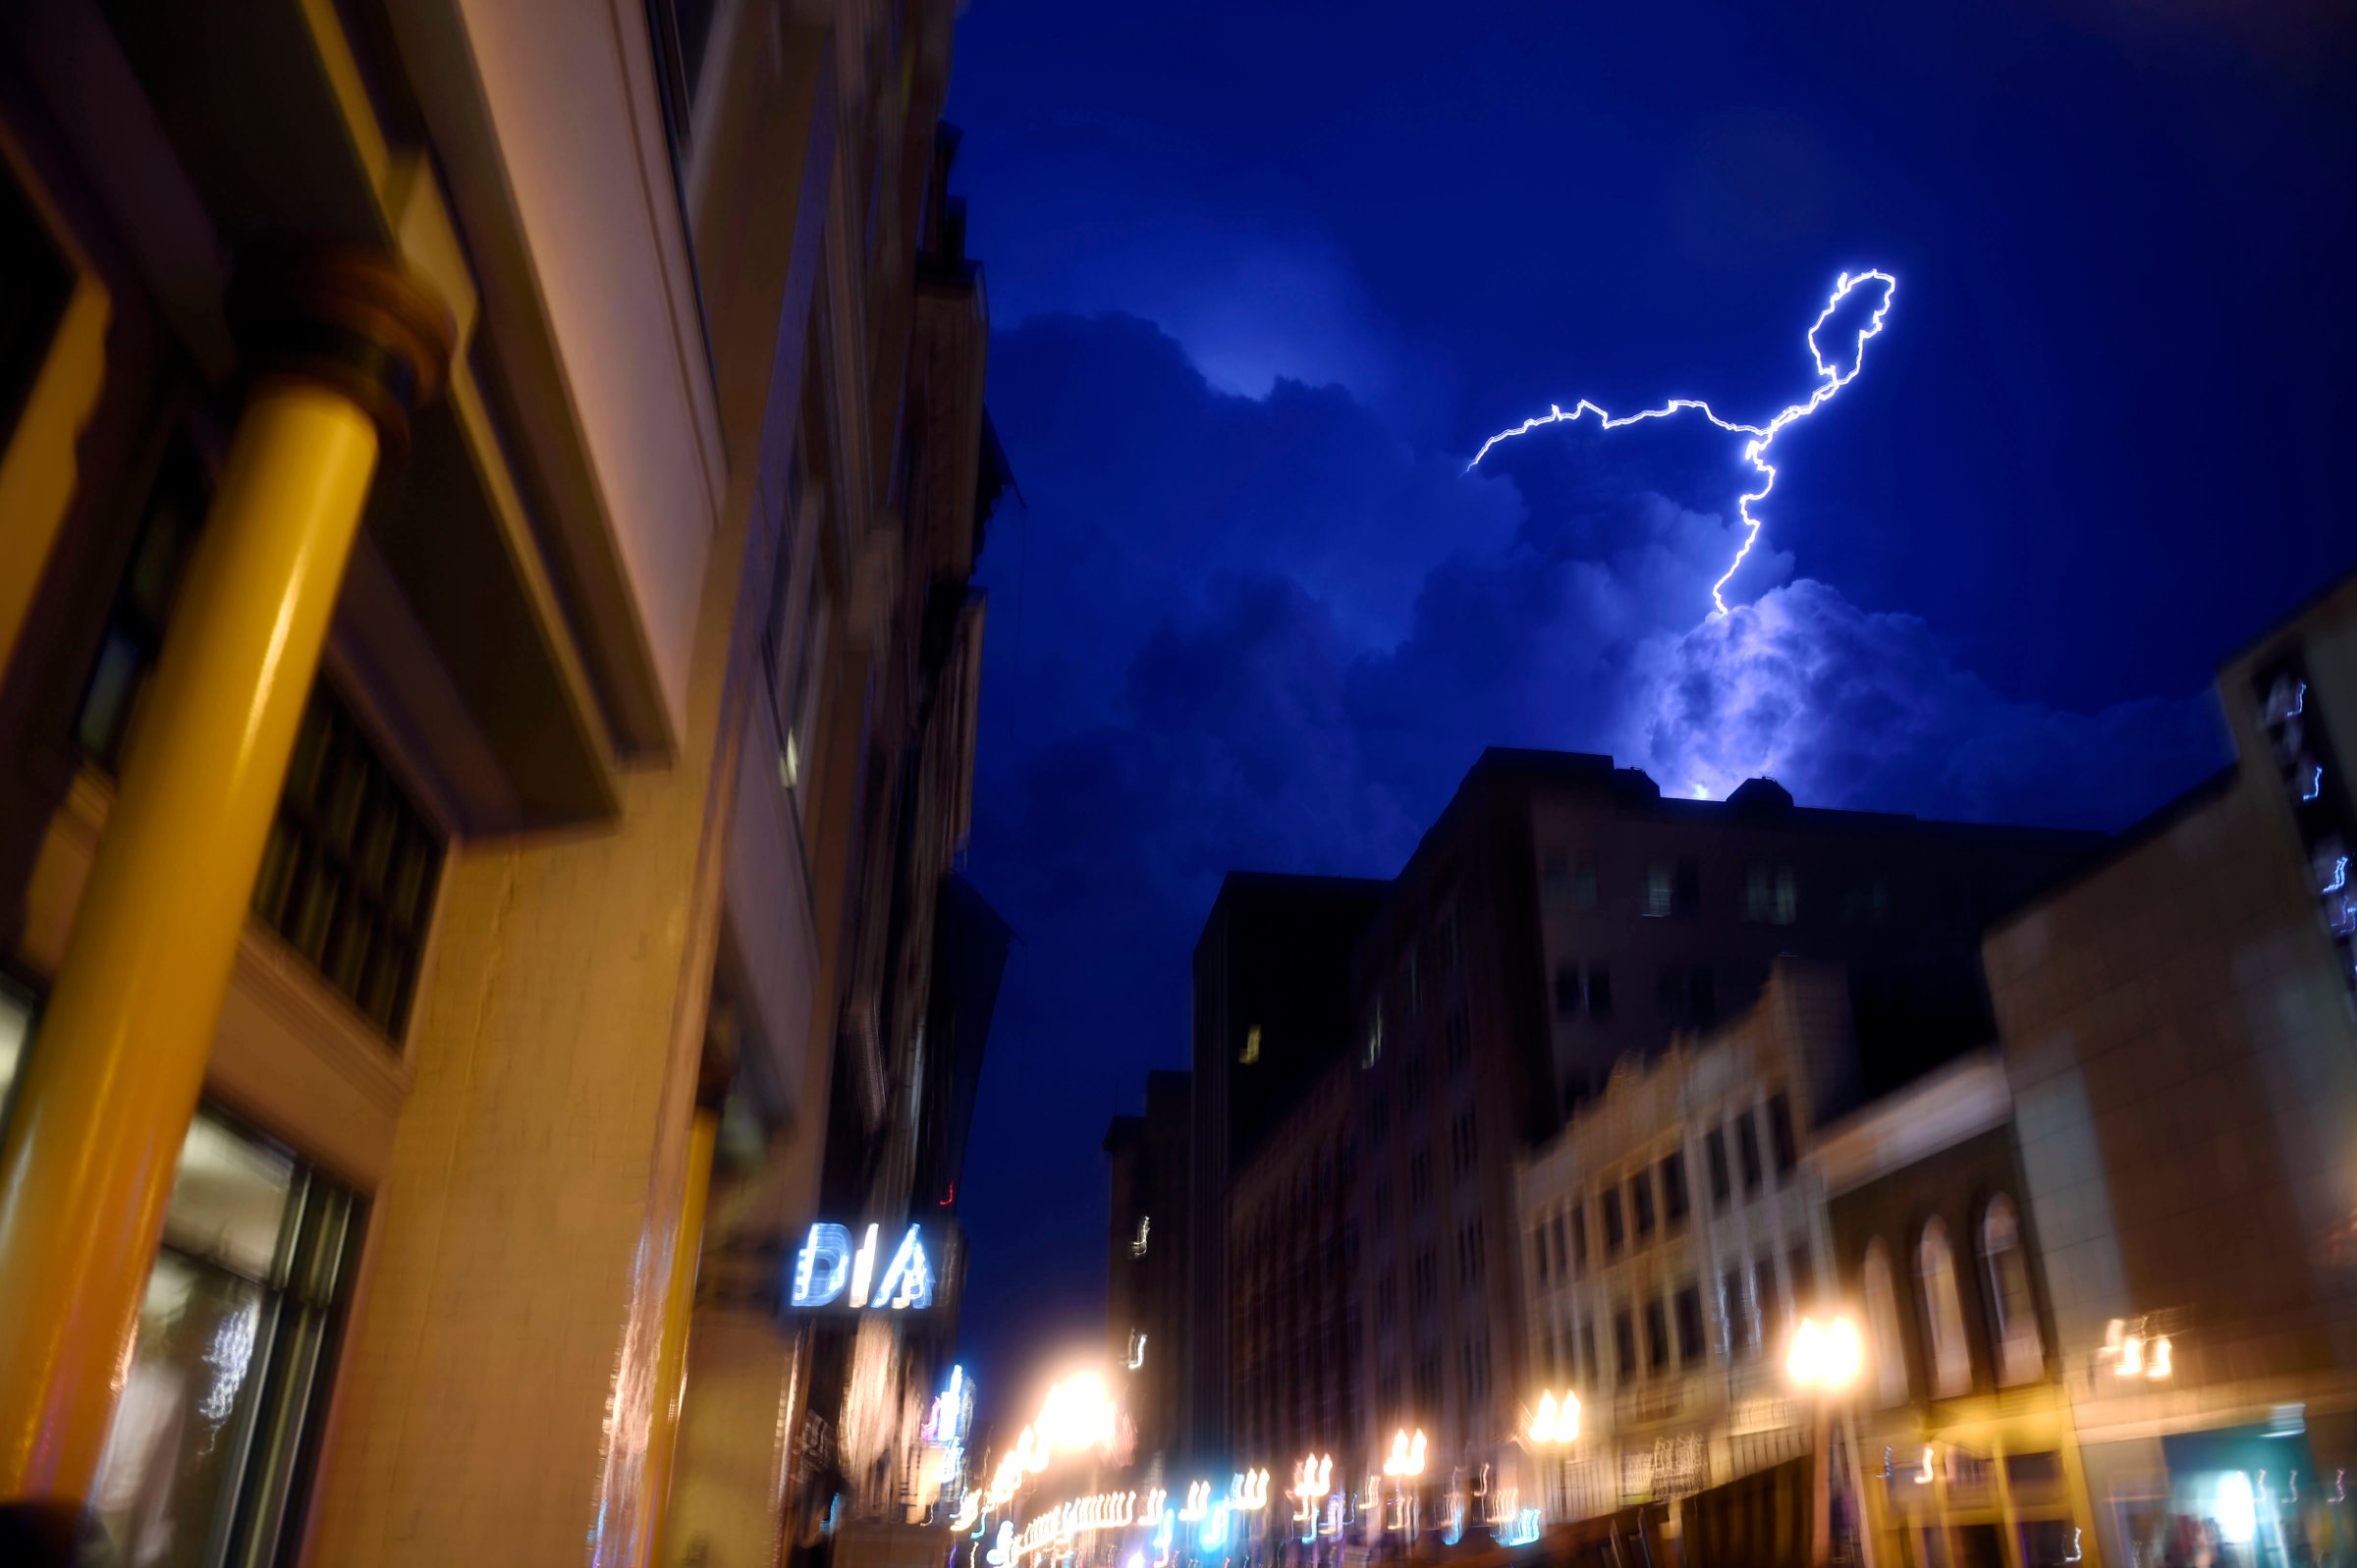 Lightning strikes over downtown in Knoxville, Tenn., on July 27, 2014.